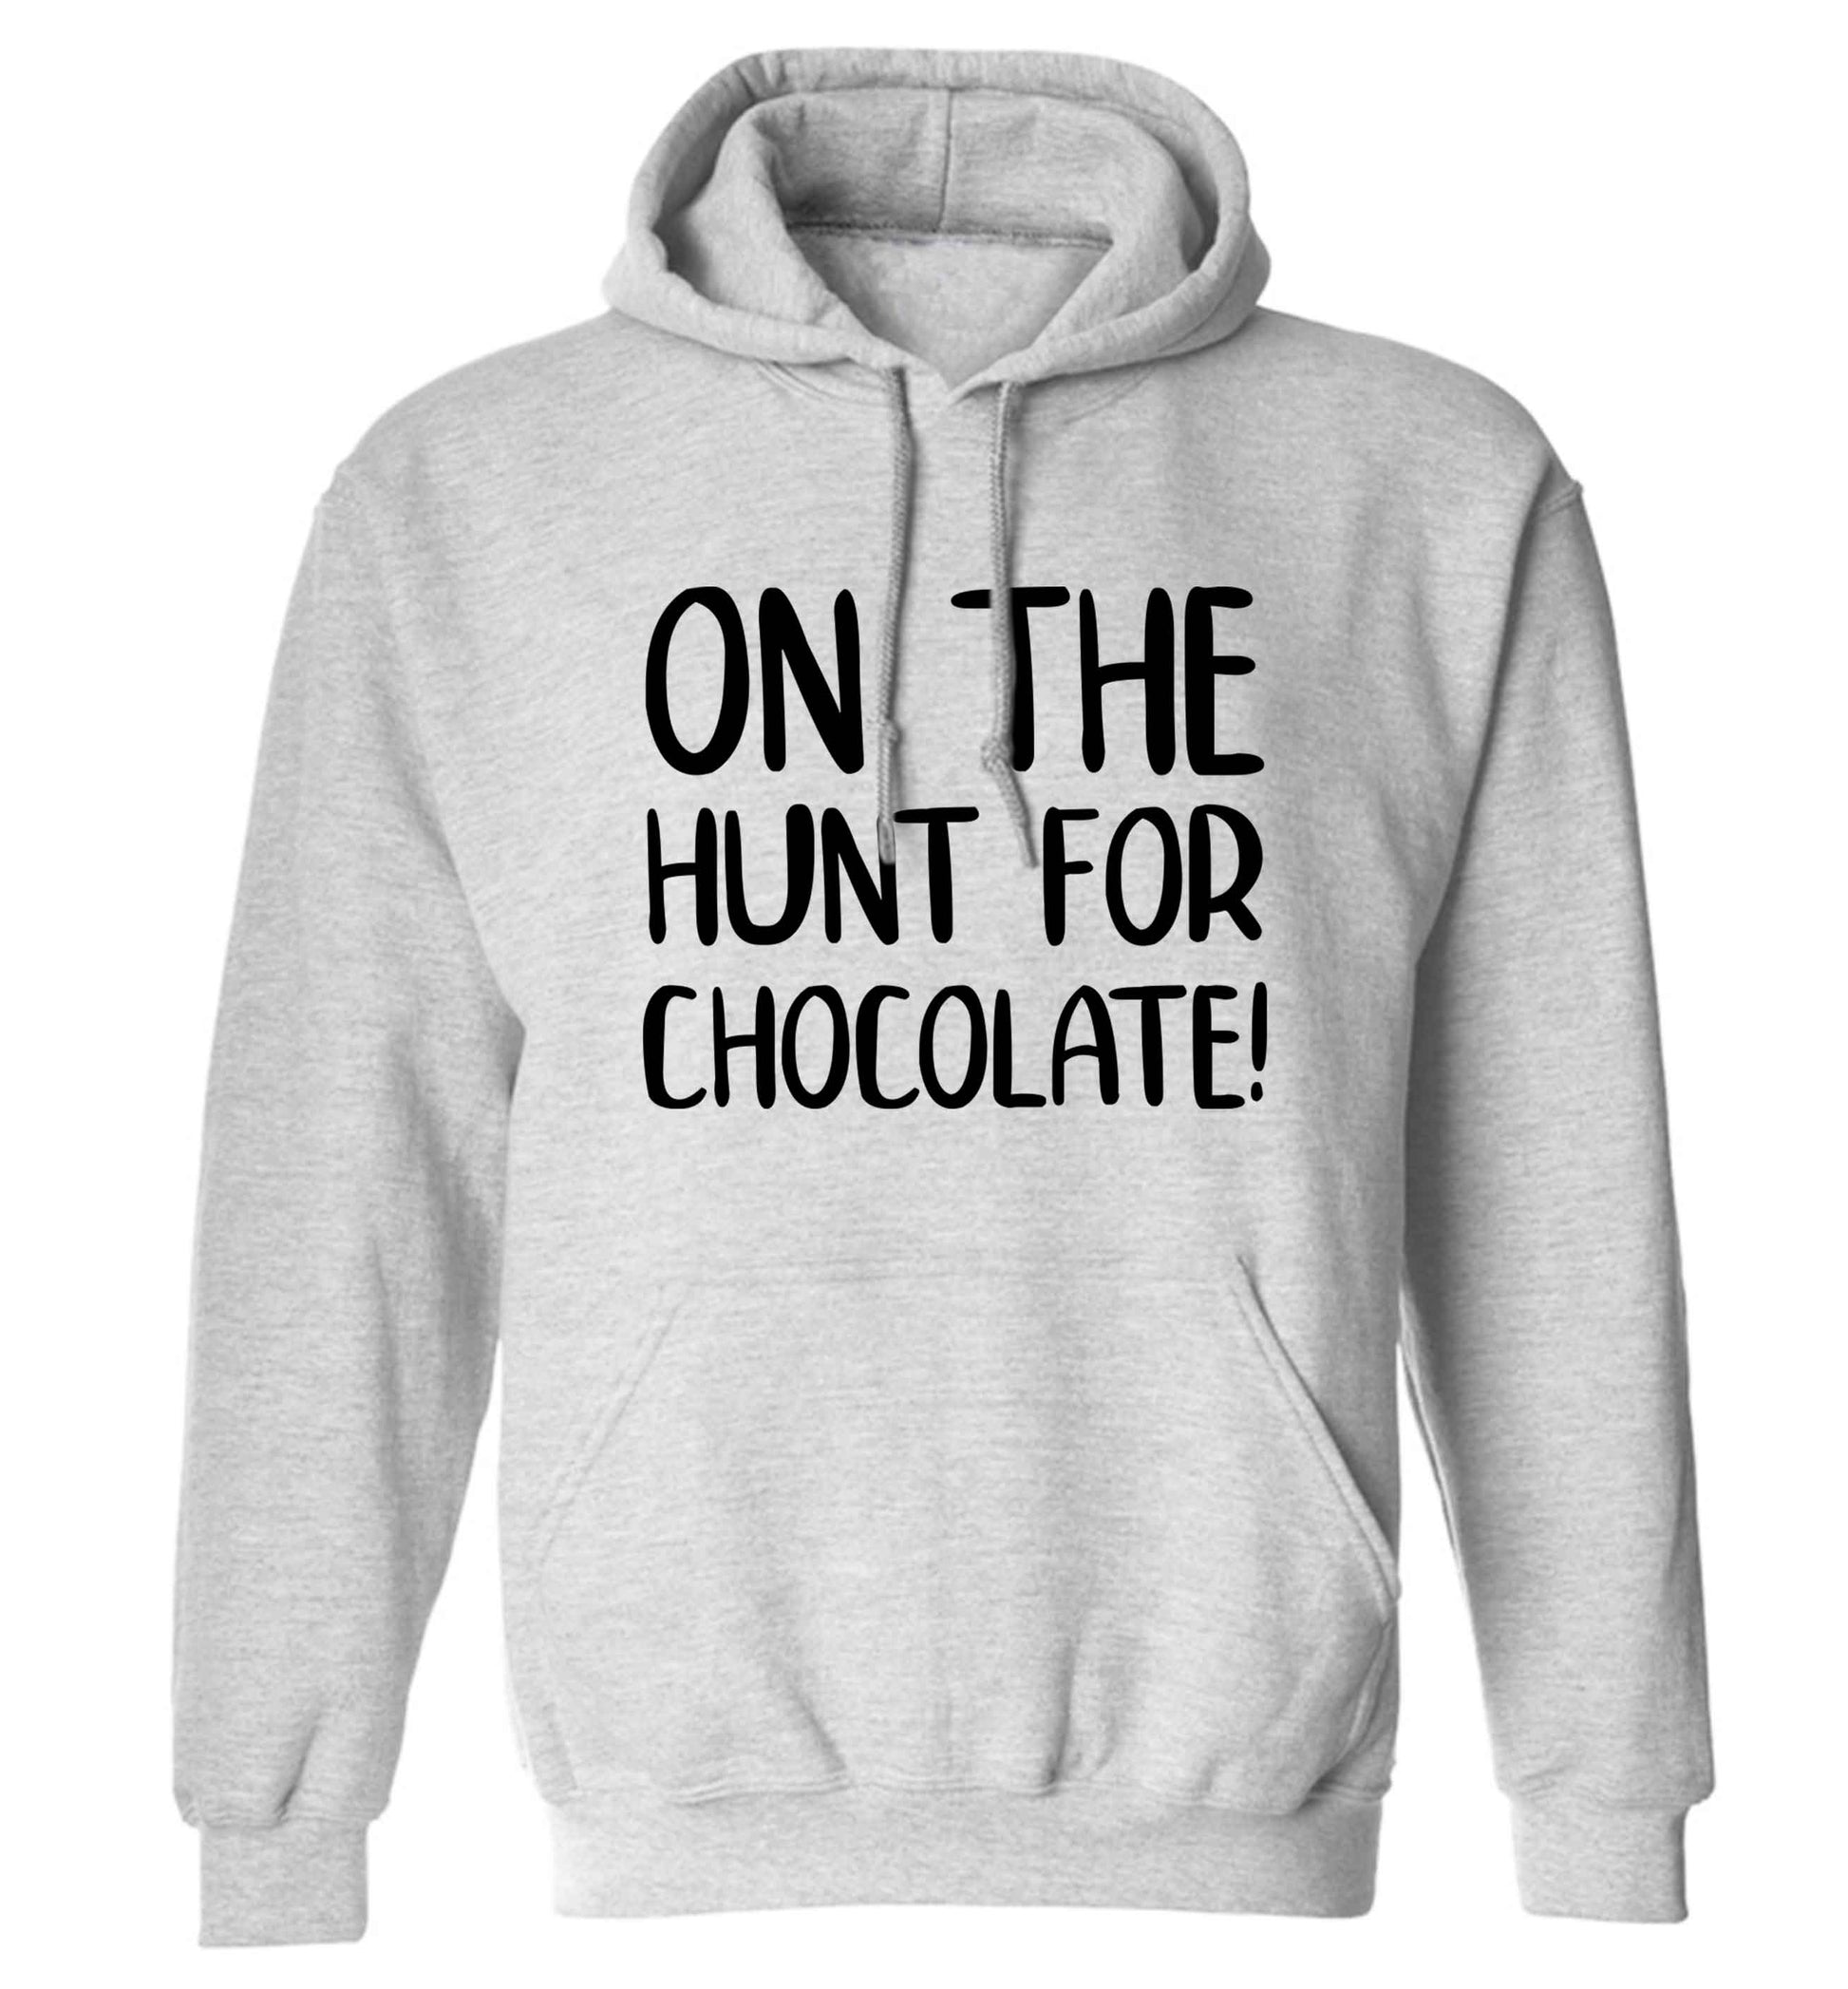 On the hunt for chocolate! adults unisex grey hoodie 2XL